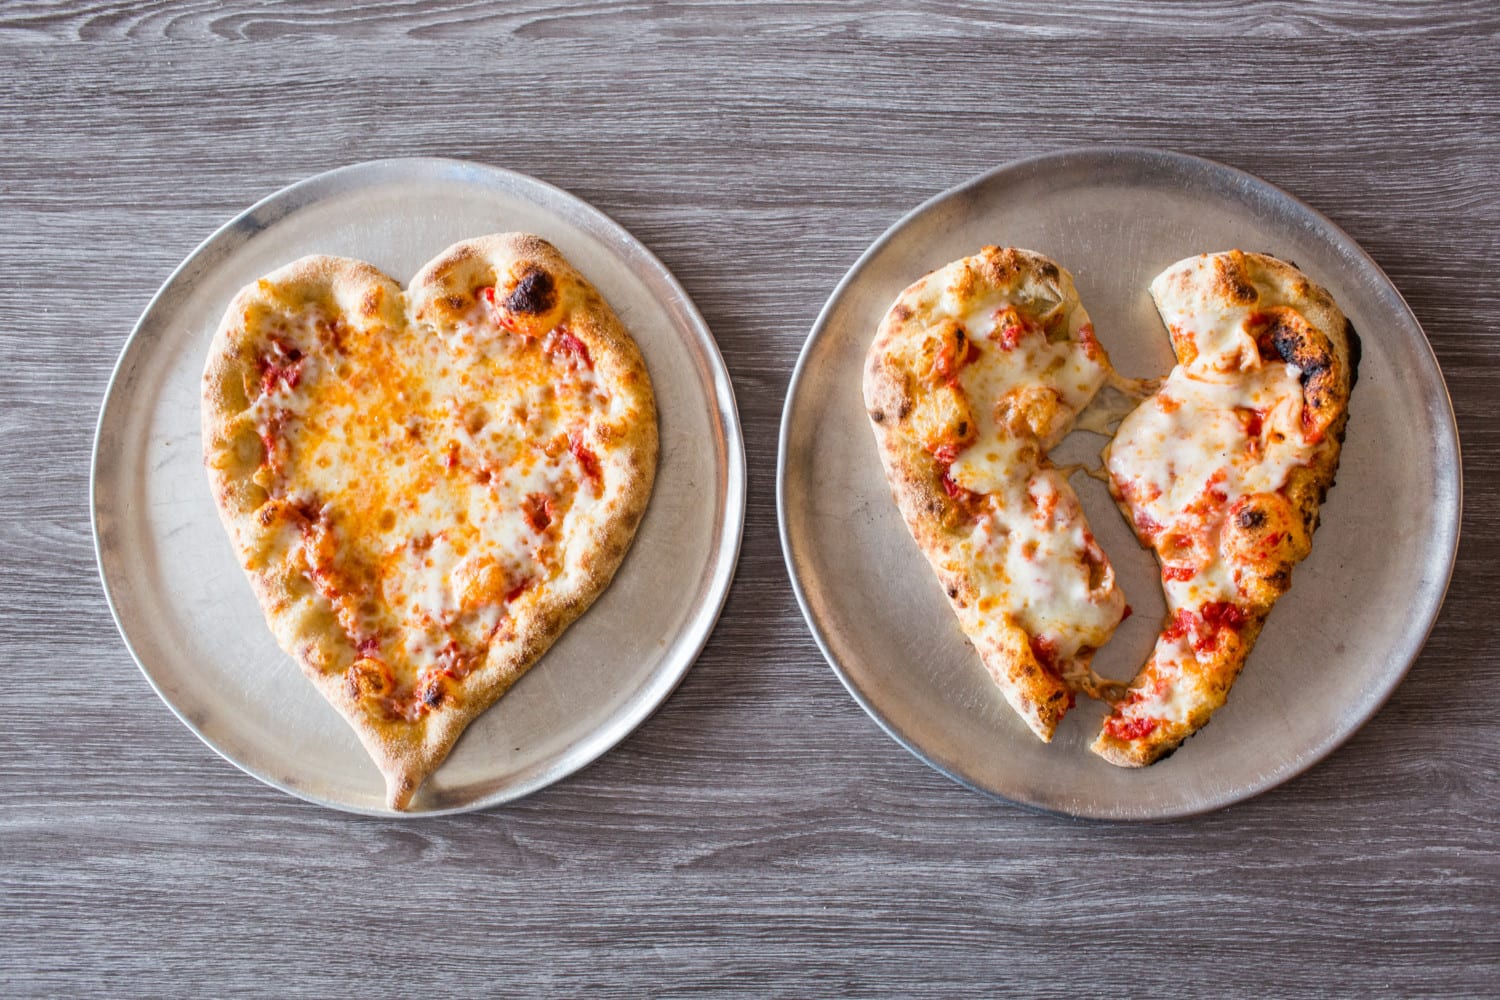 Papa John's is making heartshaped pizza for Valentine's Day